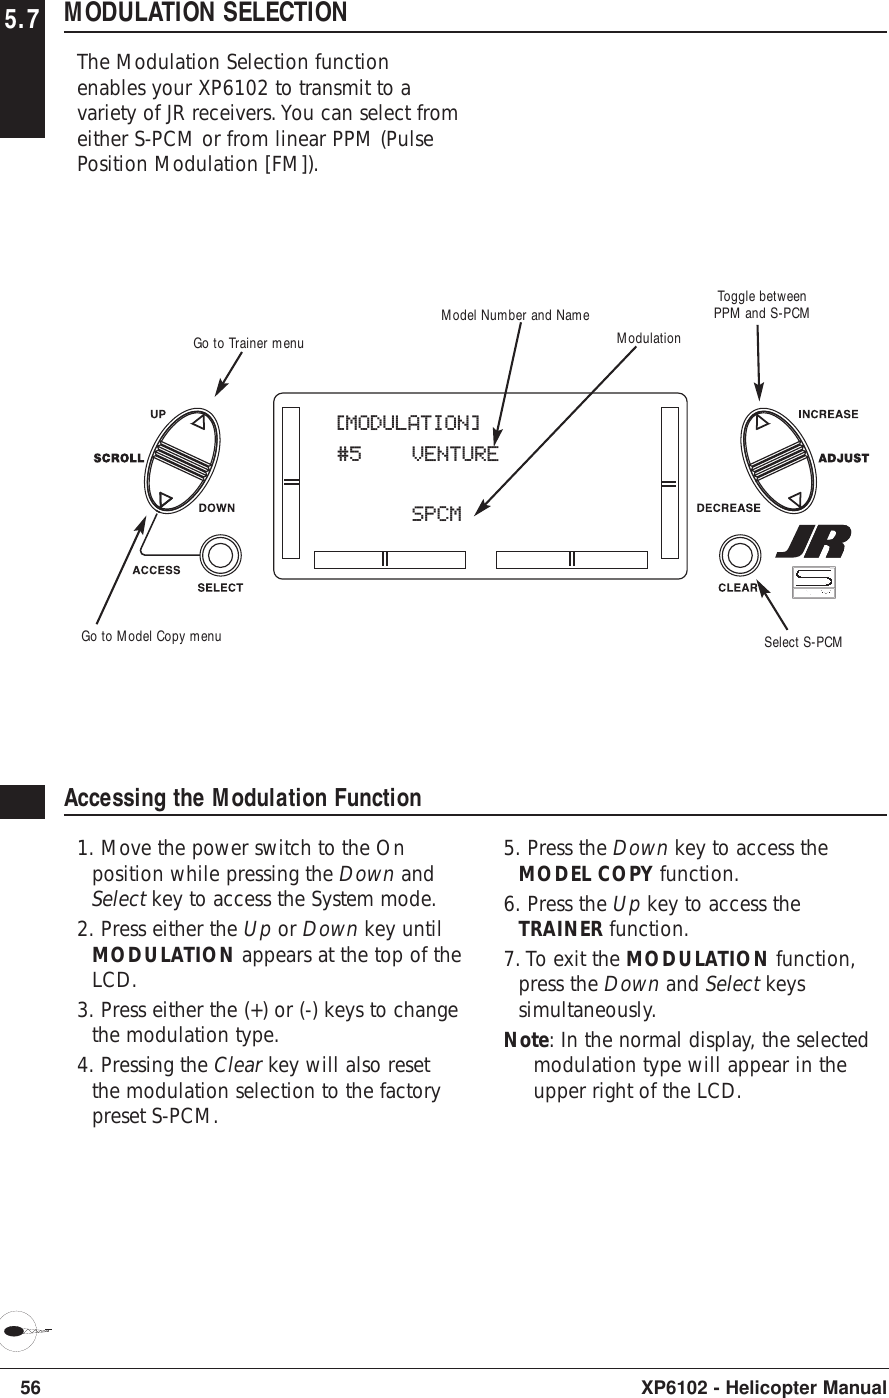 56 XP6102 - Helicopter Manual5.7 MODULATION SELECTIONThe Modulation Selection functionenables your XP6102 to transmit to avariety of JR receivers. You can select fromeither S-PCM or from linear PPM (PulsePosition Modulation [FM]).Accessing the Modulation Function1. Move the power switch to the Onposition while pressing the Down andSelect key to access the System mode.2. Press either the Up or Down key untilMODULATION appears at the top of theLCD.3. Press either the (+) or (-) keys to changethe modulation type.4. Pressing the Clear key will also resetthe modulation selection to the factorypreset S-PCM.5. Press the Down key to access theMODEL COPY function.6. Press the Up key to access theTRAINER function.7. To exit the MODULATION function,press the Down and Select keyssimultaneously.Note: In the normal display, the selectedmodulation type will appear in theupper right of the LCD.[MODULATION]#5 VENTURESPCMModulationModel Number and NameSelect S-PCMGo to Trainer menuGo to Model Copy menuToggle betweenPPM and S-PCM